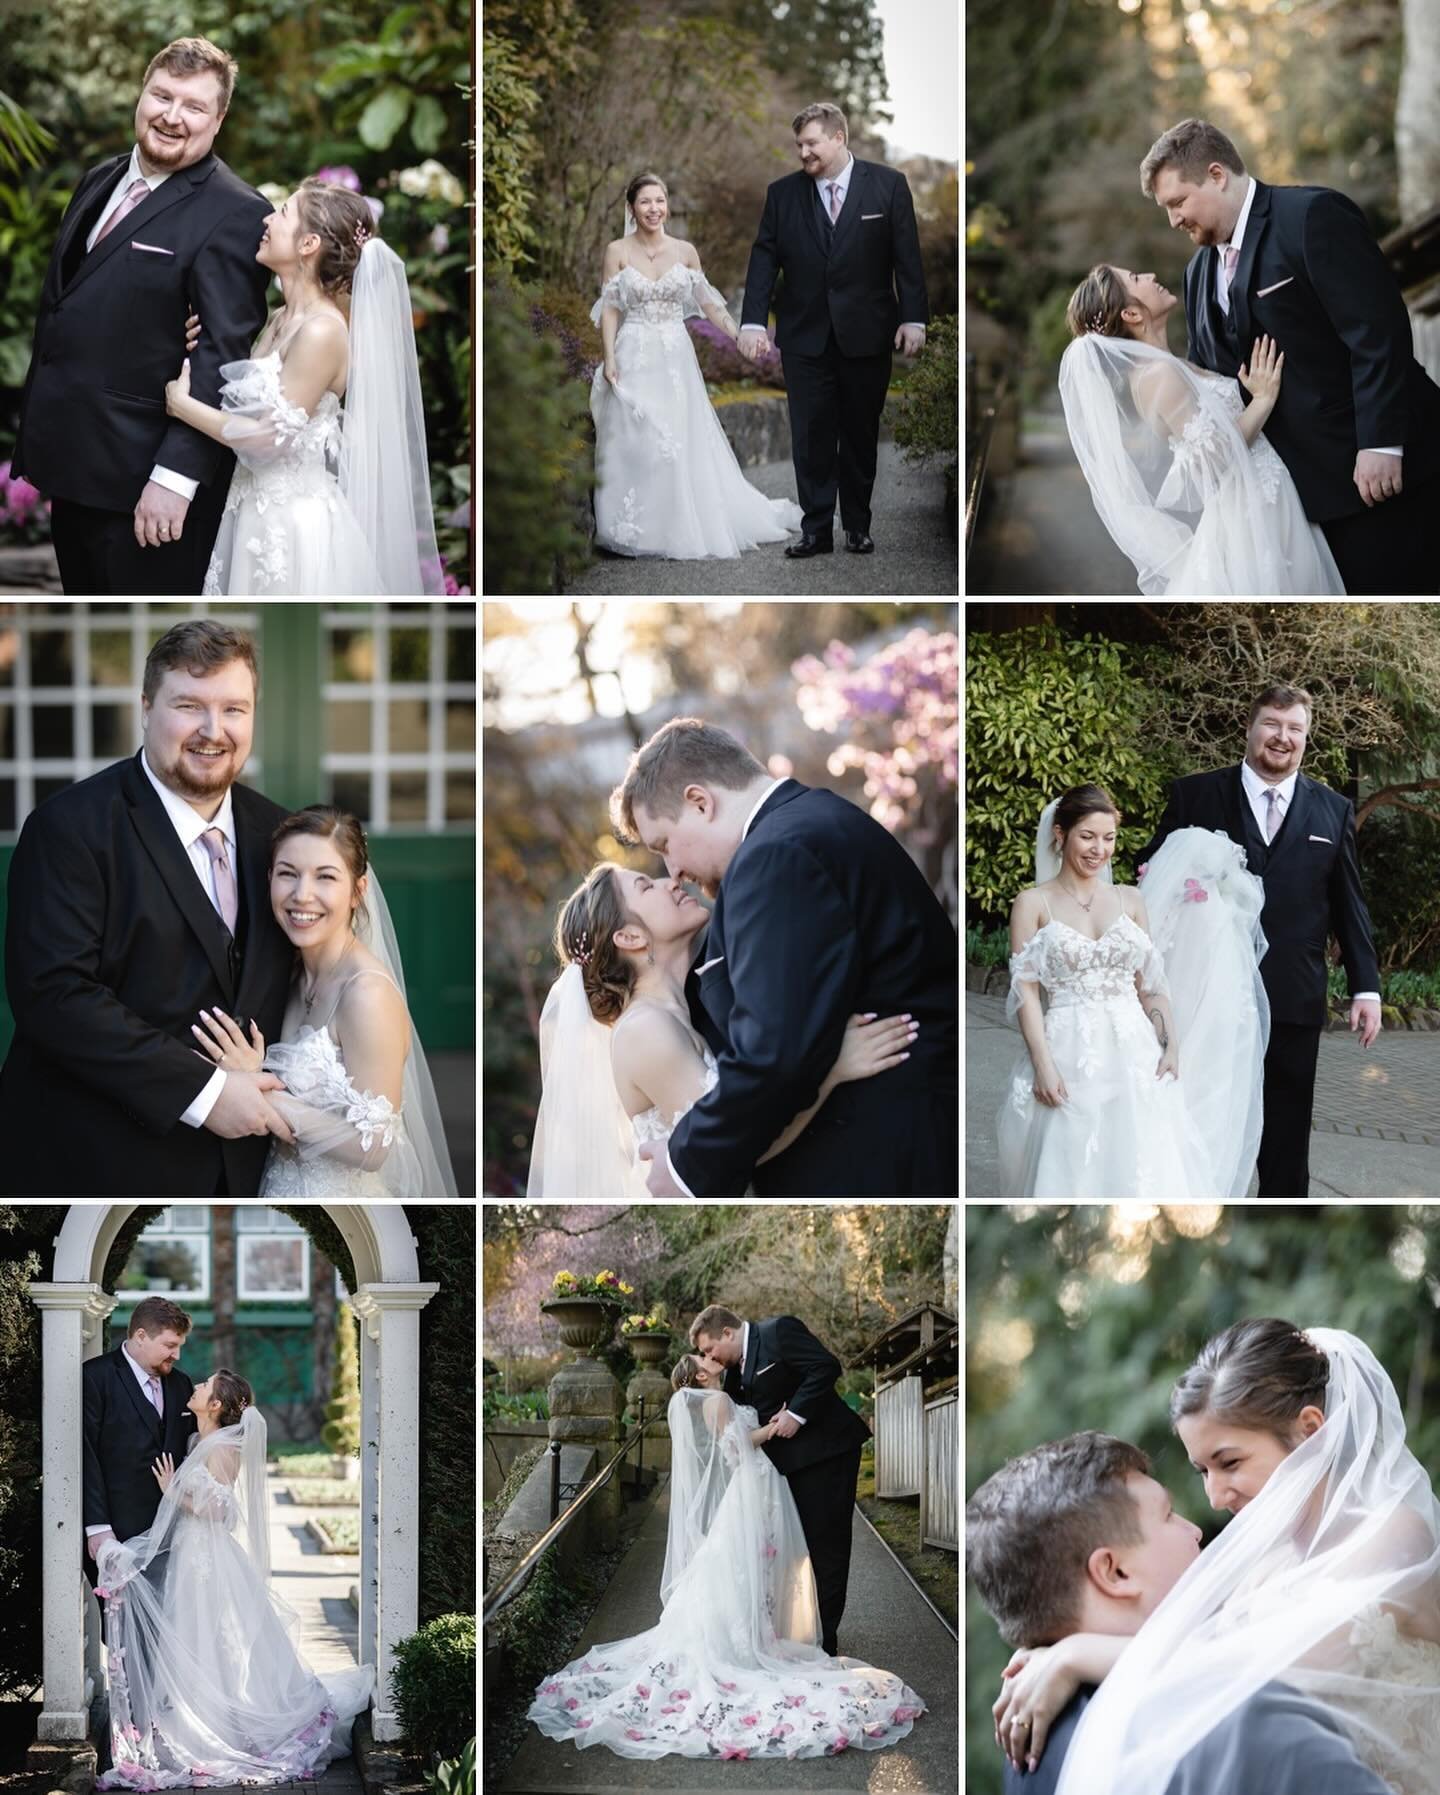 A selection of images of Cleo and Hunter @thebutchartgardens after their ceremony. We had a lot of fun. 
*
*
*
#Gulfislandweddings #vancouvercouple #weddingsvancouver #vancouverengagementphotographer #weddingvancouver #bridemoments #weddingwirecanada